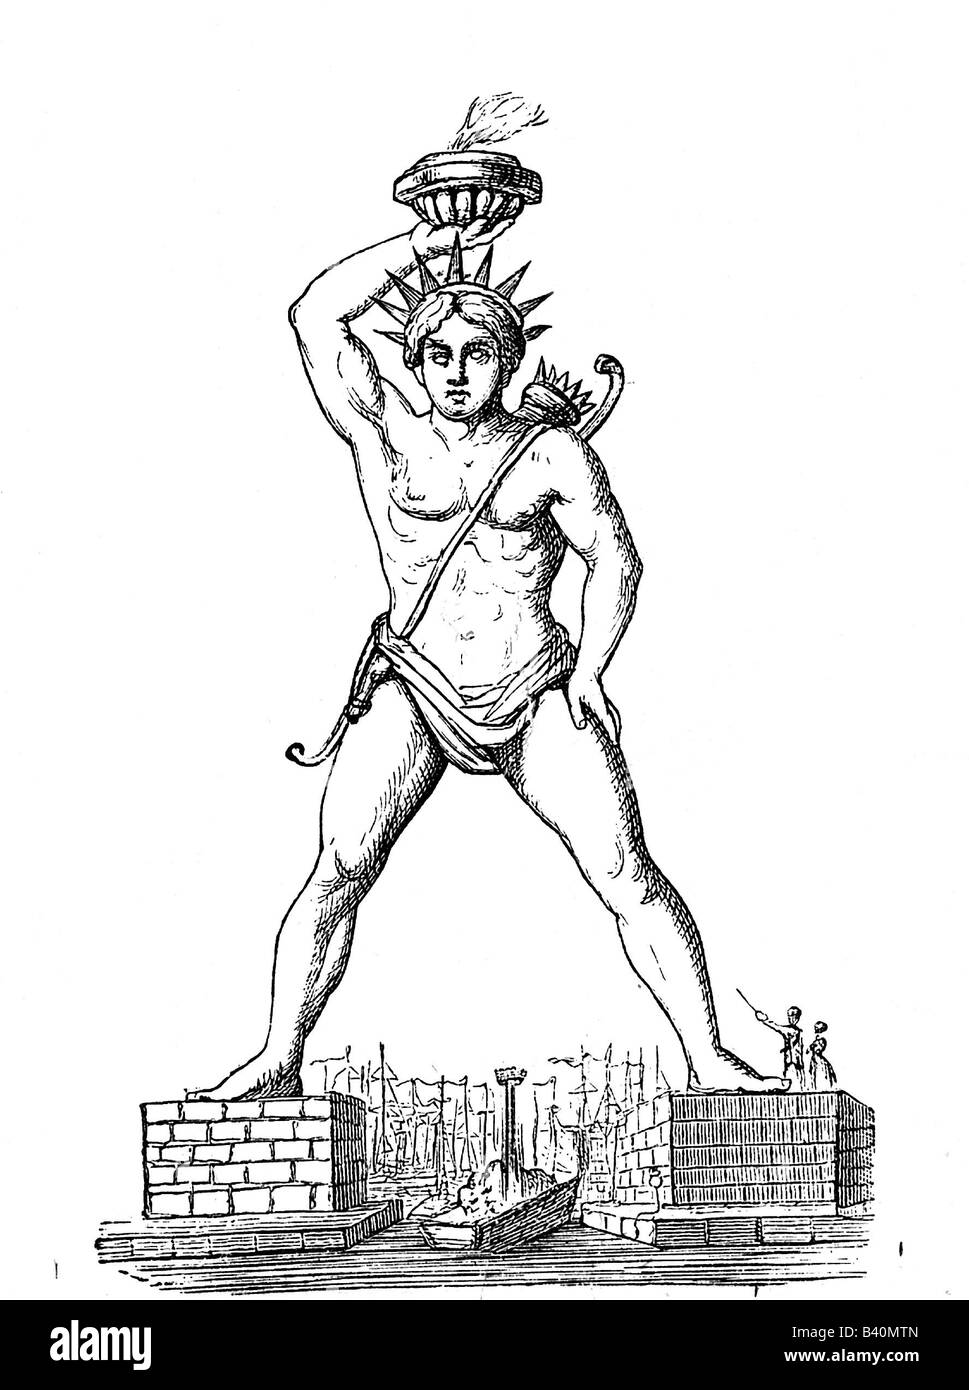 ancient world, wonder of the world, Colossus of Rhodes, statue of Helios, reconstruction, engraving, 19th century, bow and arrow, fire, sun-god, sun god, mythology, Greece, Greek, historical, historic, portal, port entrance, gate, giant, one of the Seven Wonders of the World, ancient world, people, Stock Photo